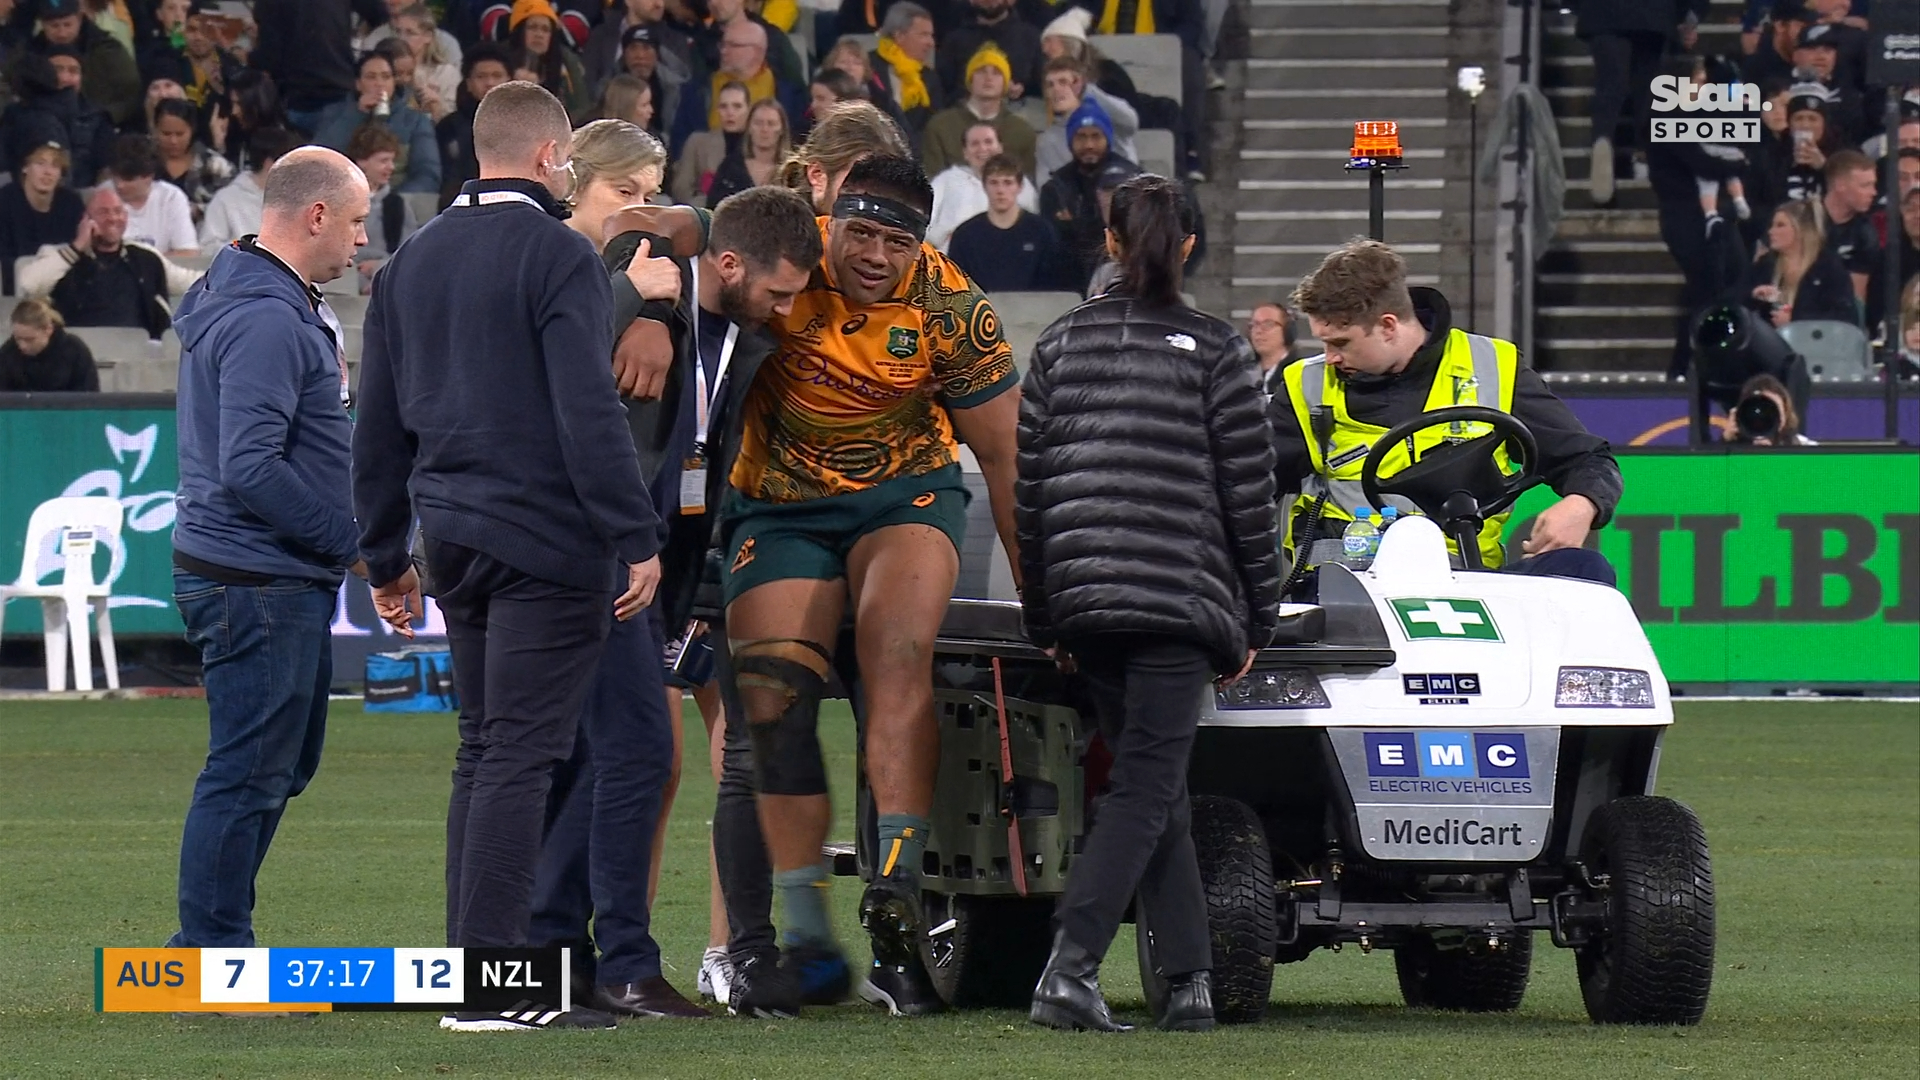 Brutal blow as Wallabies captain carted off